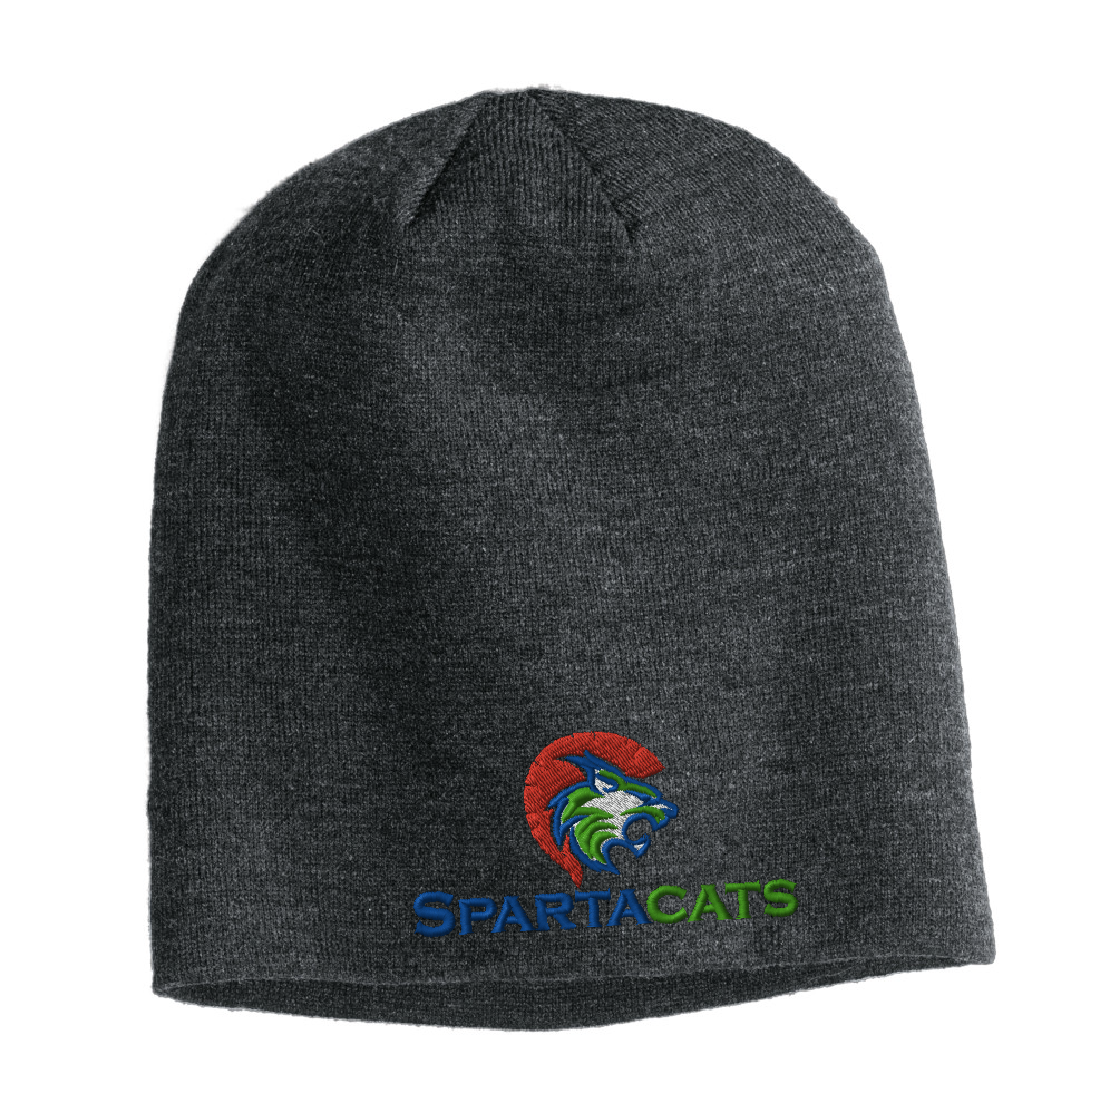 SpartaCats Slouch Beanie